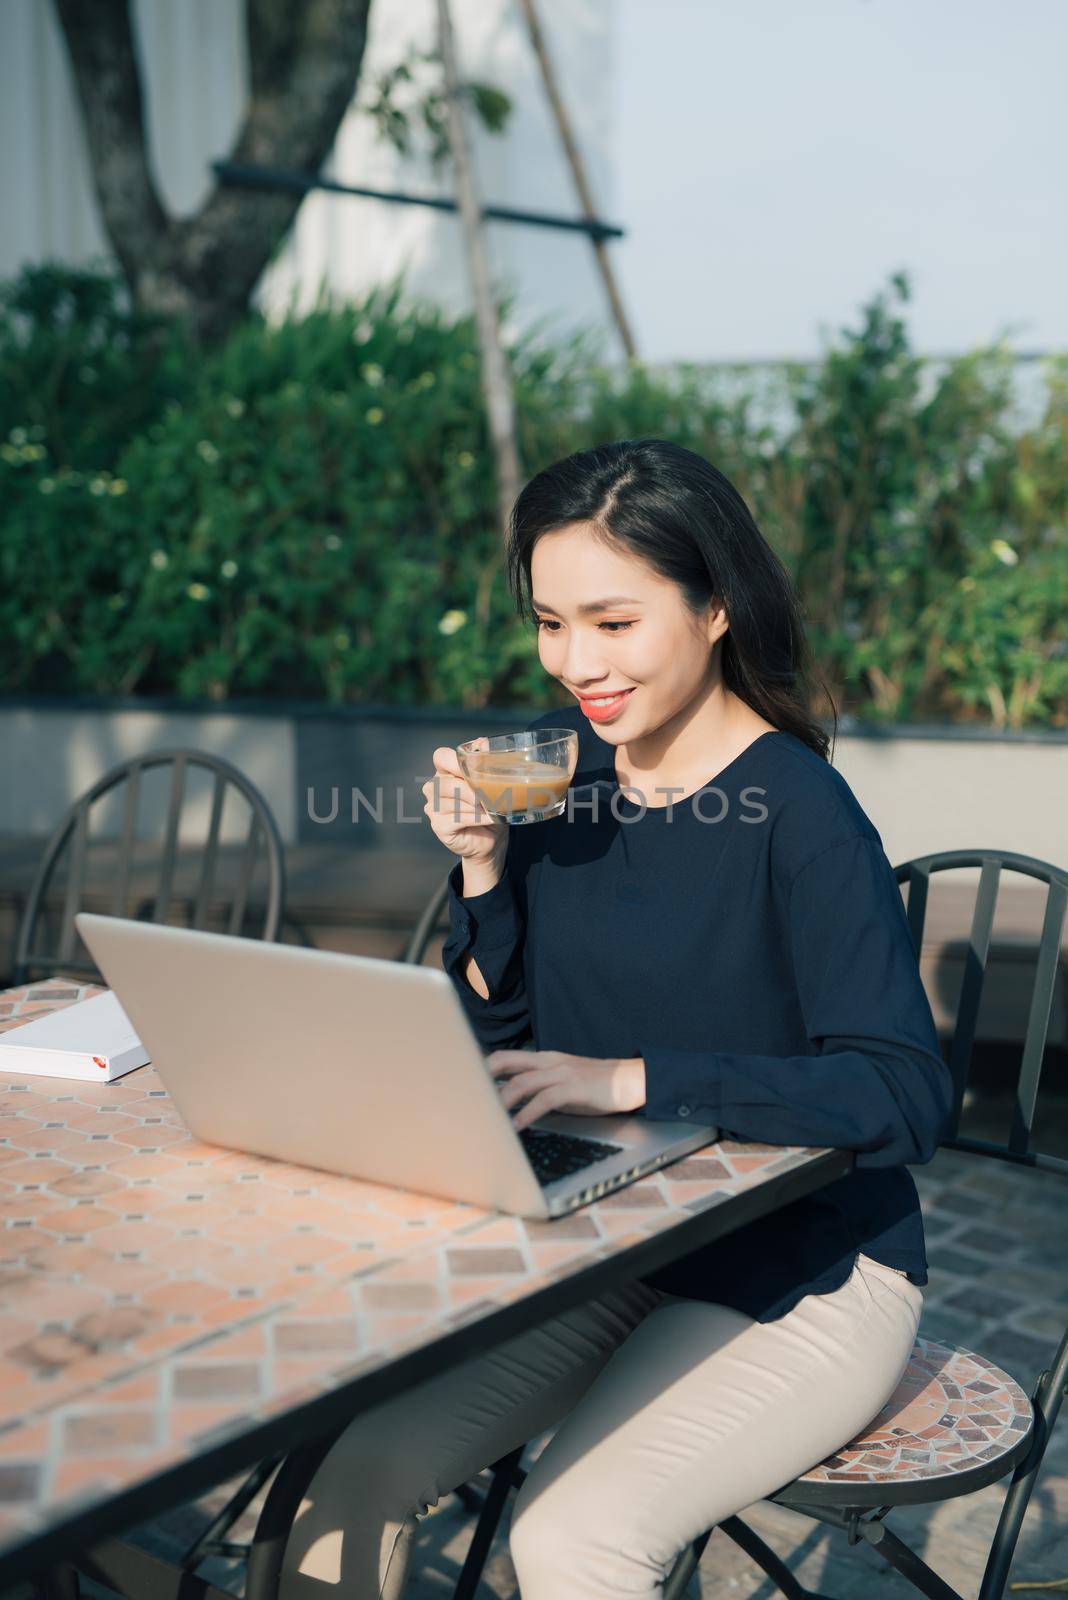 Taking advantages of free Wi-Fi. Beautiful young woman working on laptop and smiling while sitting outdoors